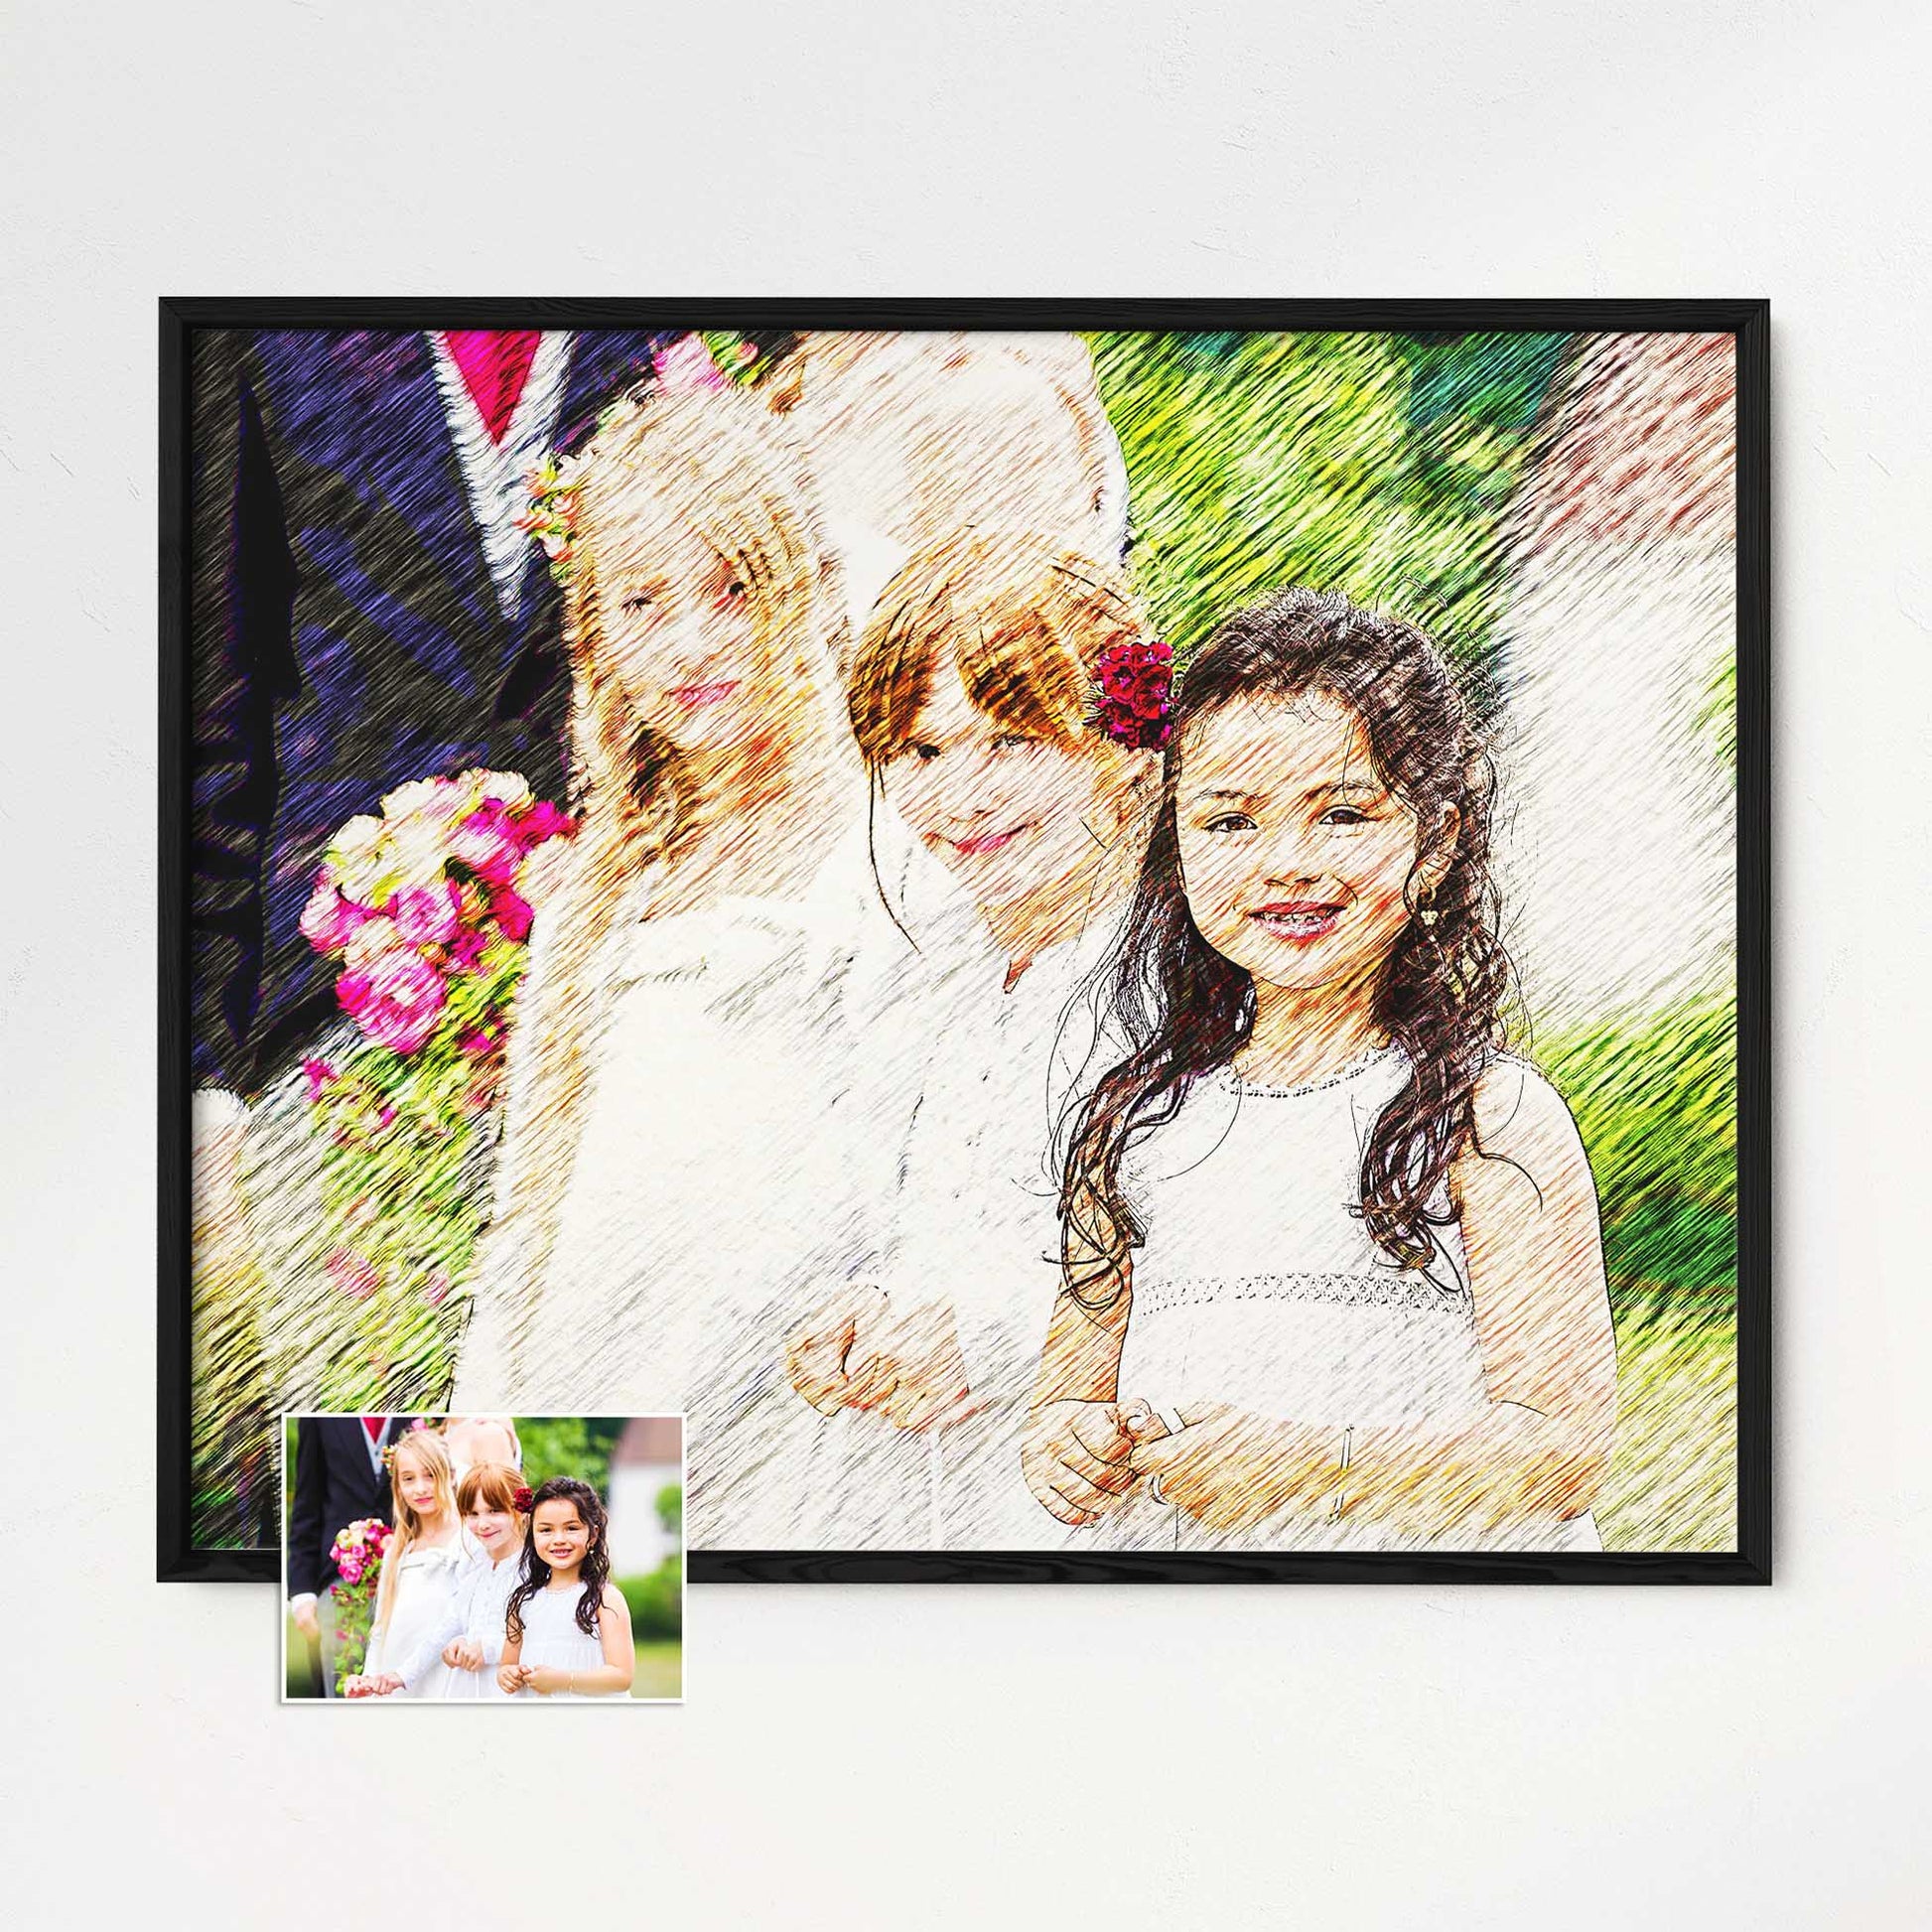 Immerse yourself in the beauty of our Personalised Artsy Illustration Framed Print. Created from your photo, this artwork is printed on museum-quality paper, delivering a fine art feel. Encased in a natural wood frame